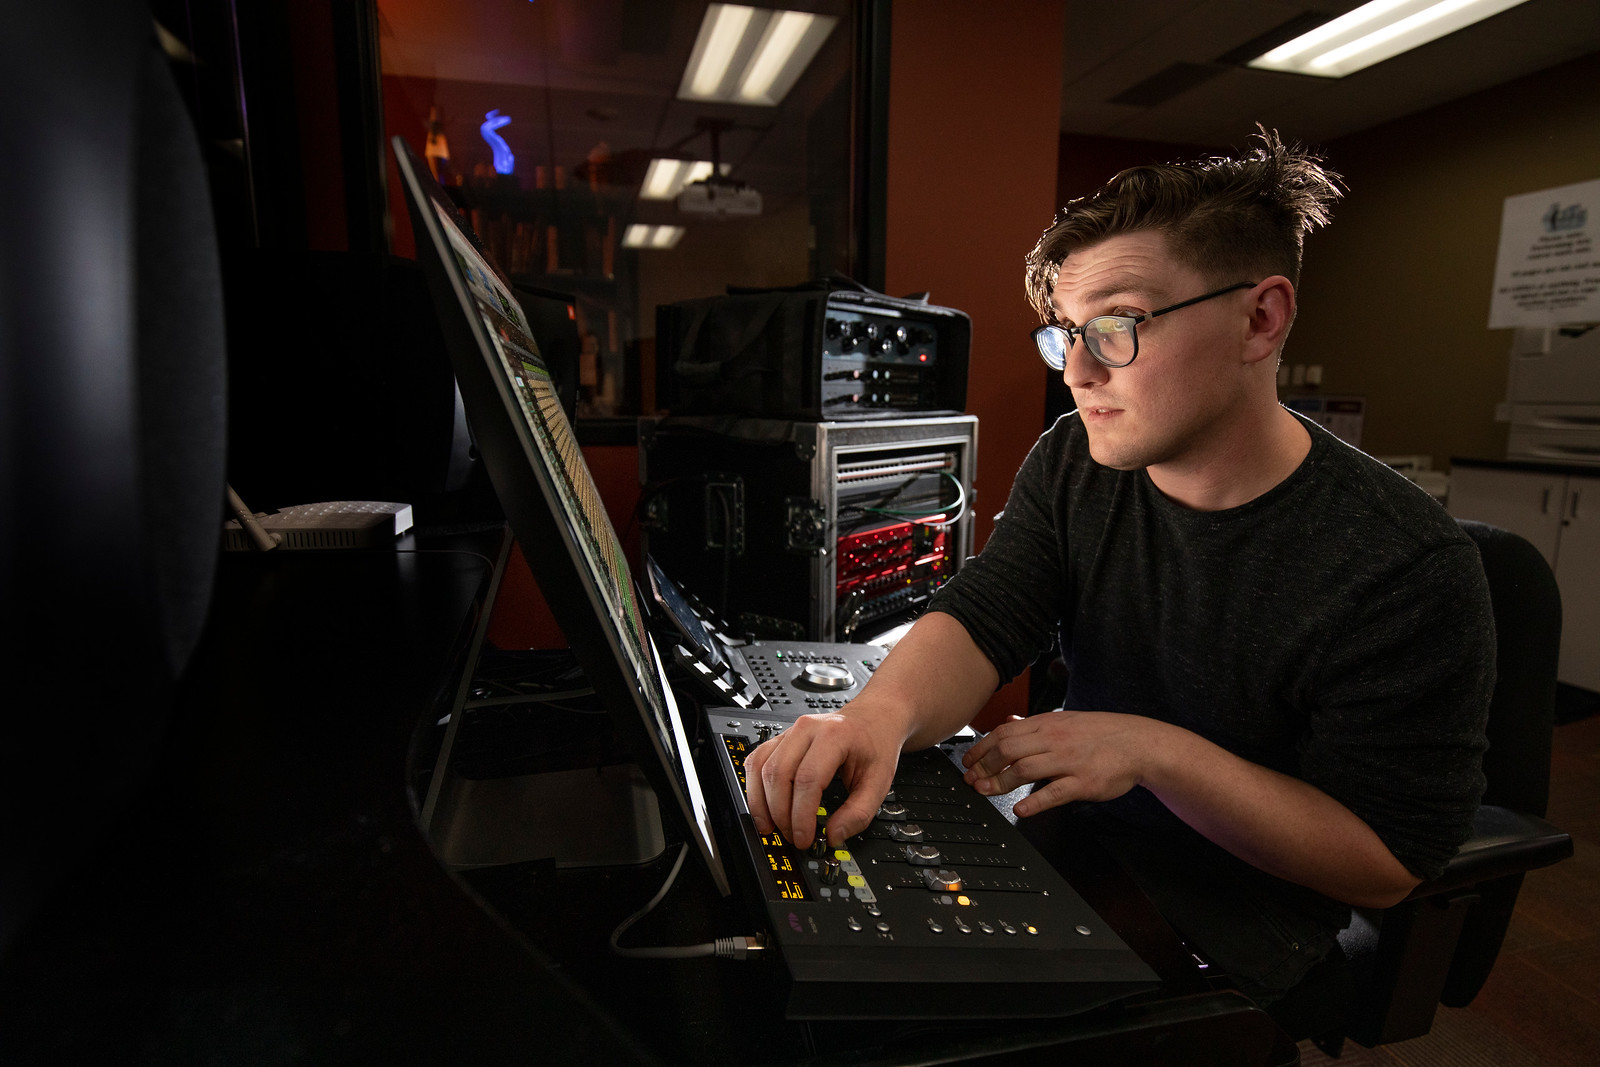 Sound Production/Recording students in the Department of Performing Arts Technology Lab. January 9, 2019.